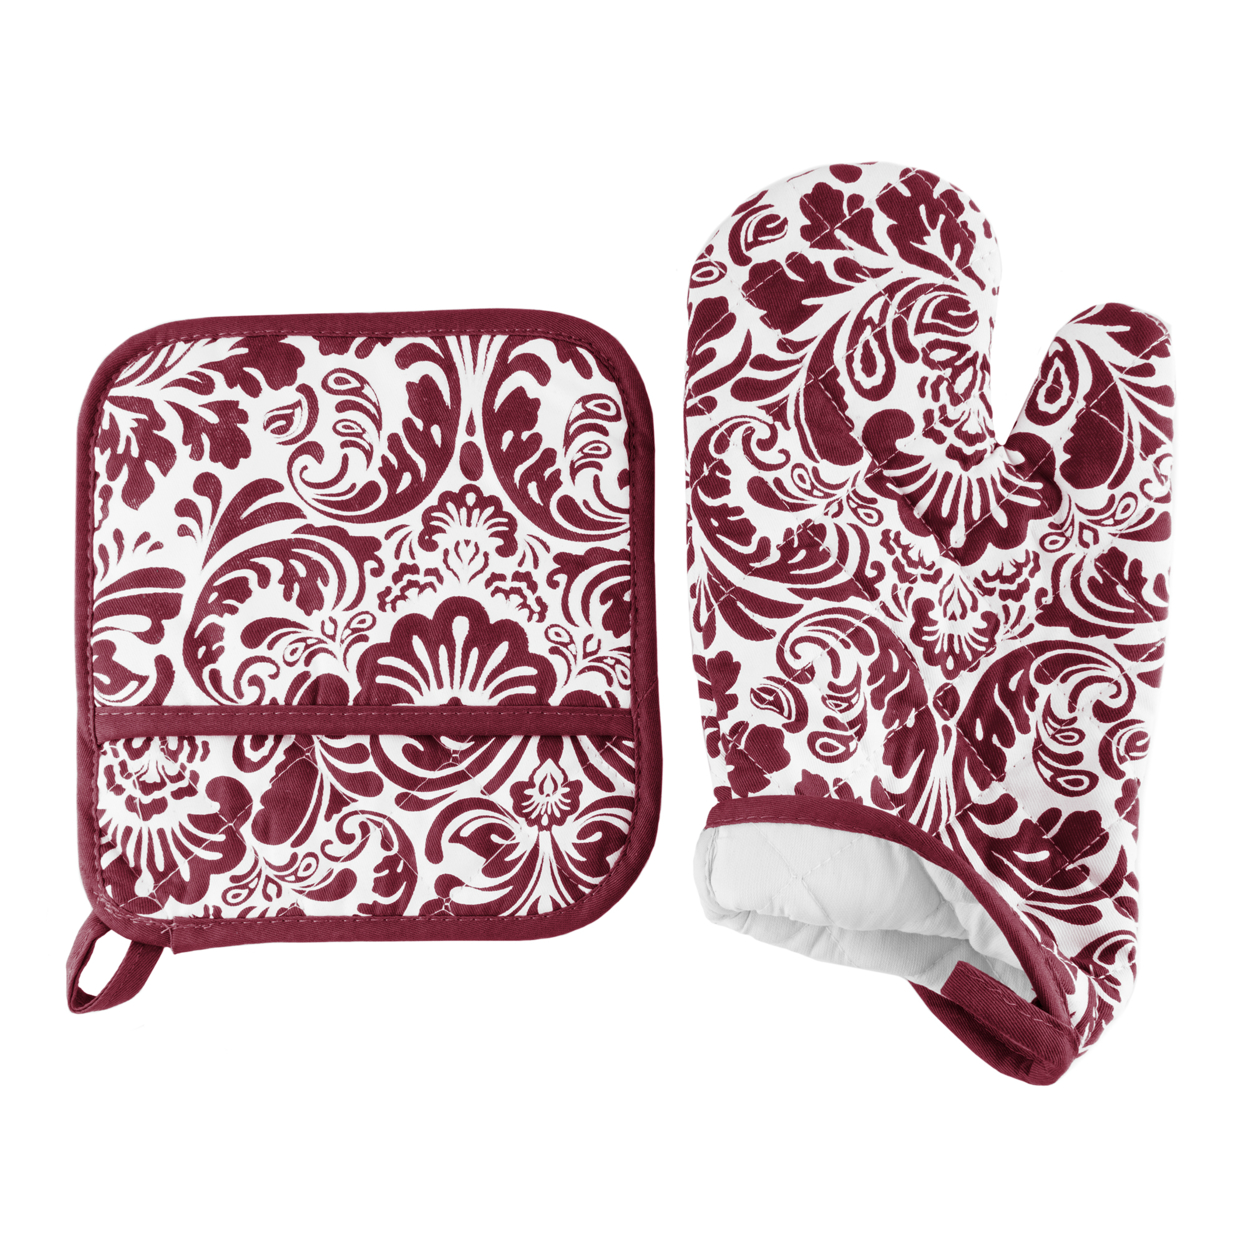 Oven Mitt And Pot Hold Oversized Flame Heat Protection Big Kitchen Safety Burgundy